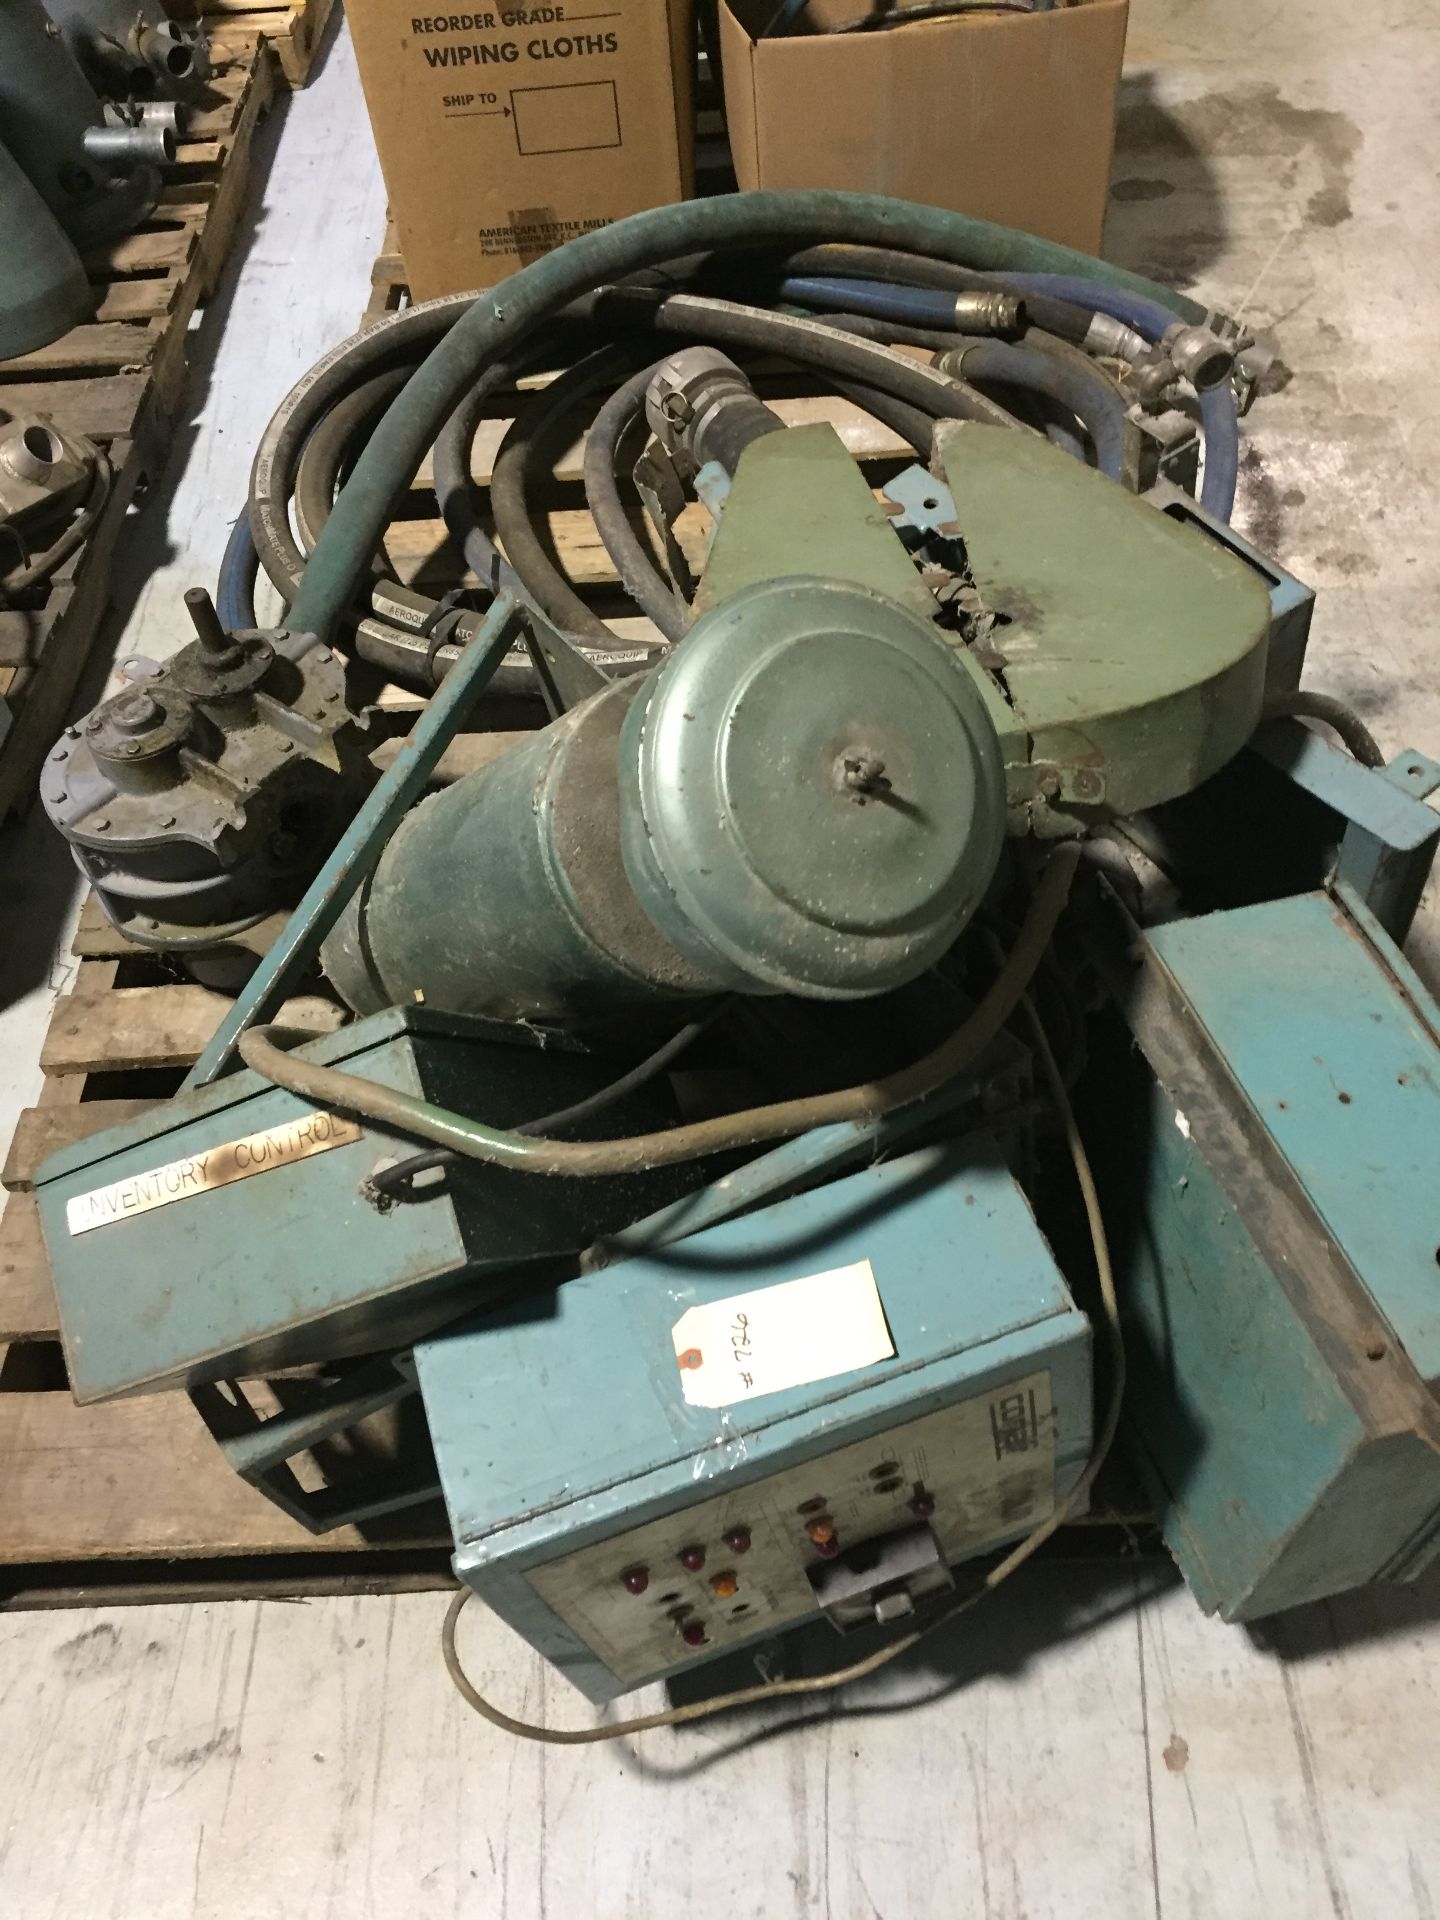 MISC. CONAIR MATERIAL MIXER PARTS, MISC. HOSES & TRANSFORMER - Image 2 of 6